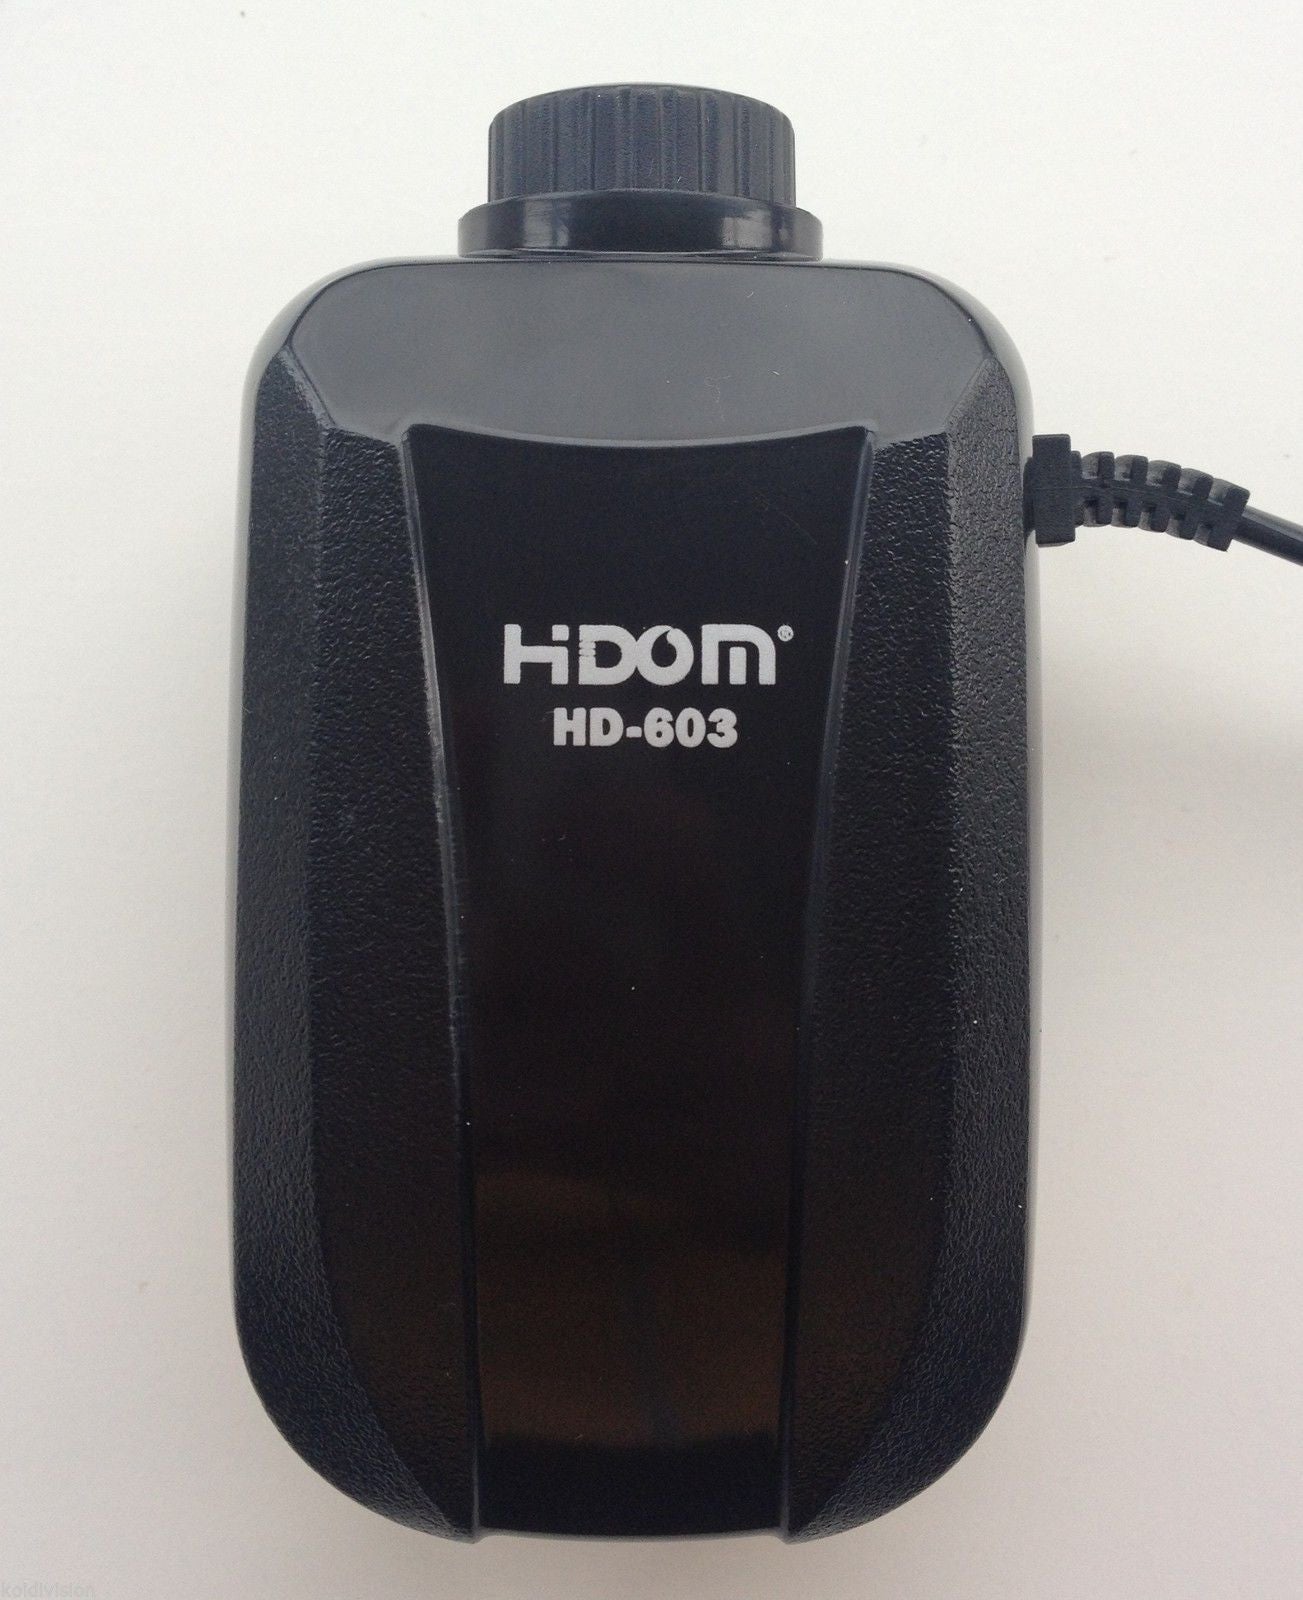 Hi-Dom 4.0w Adjustable Twin Air Pump with Accessories - Air Pumps - Koidivision